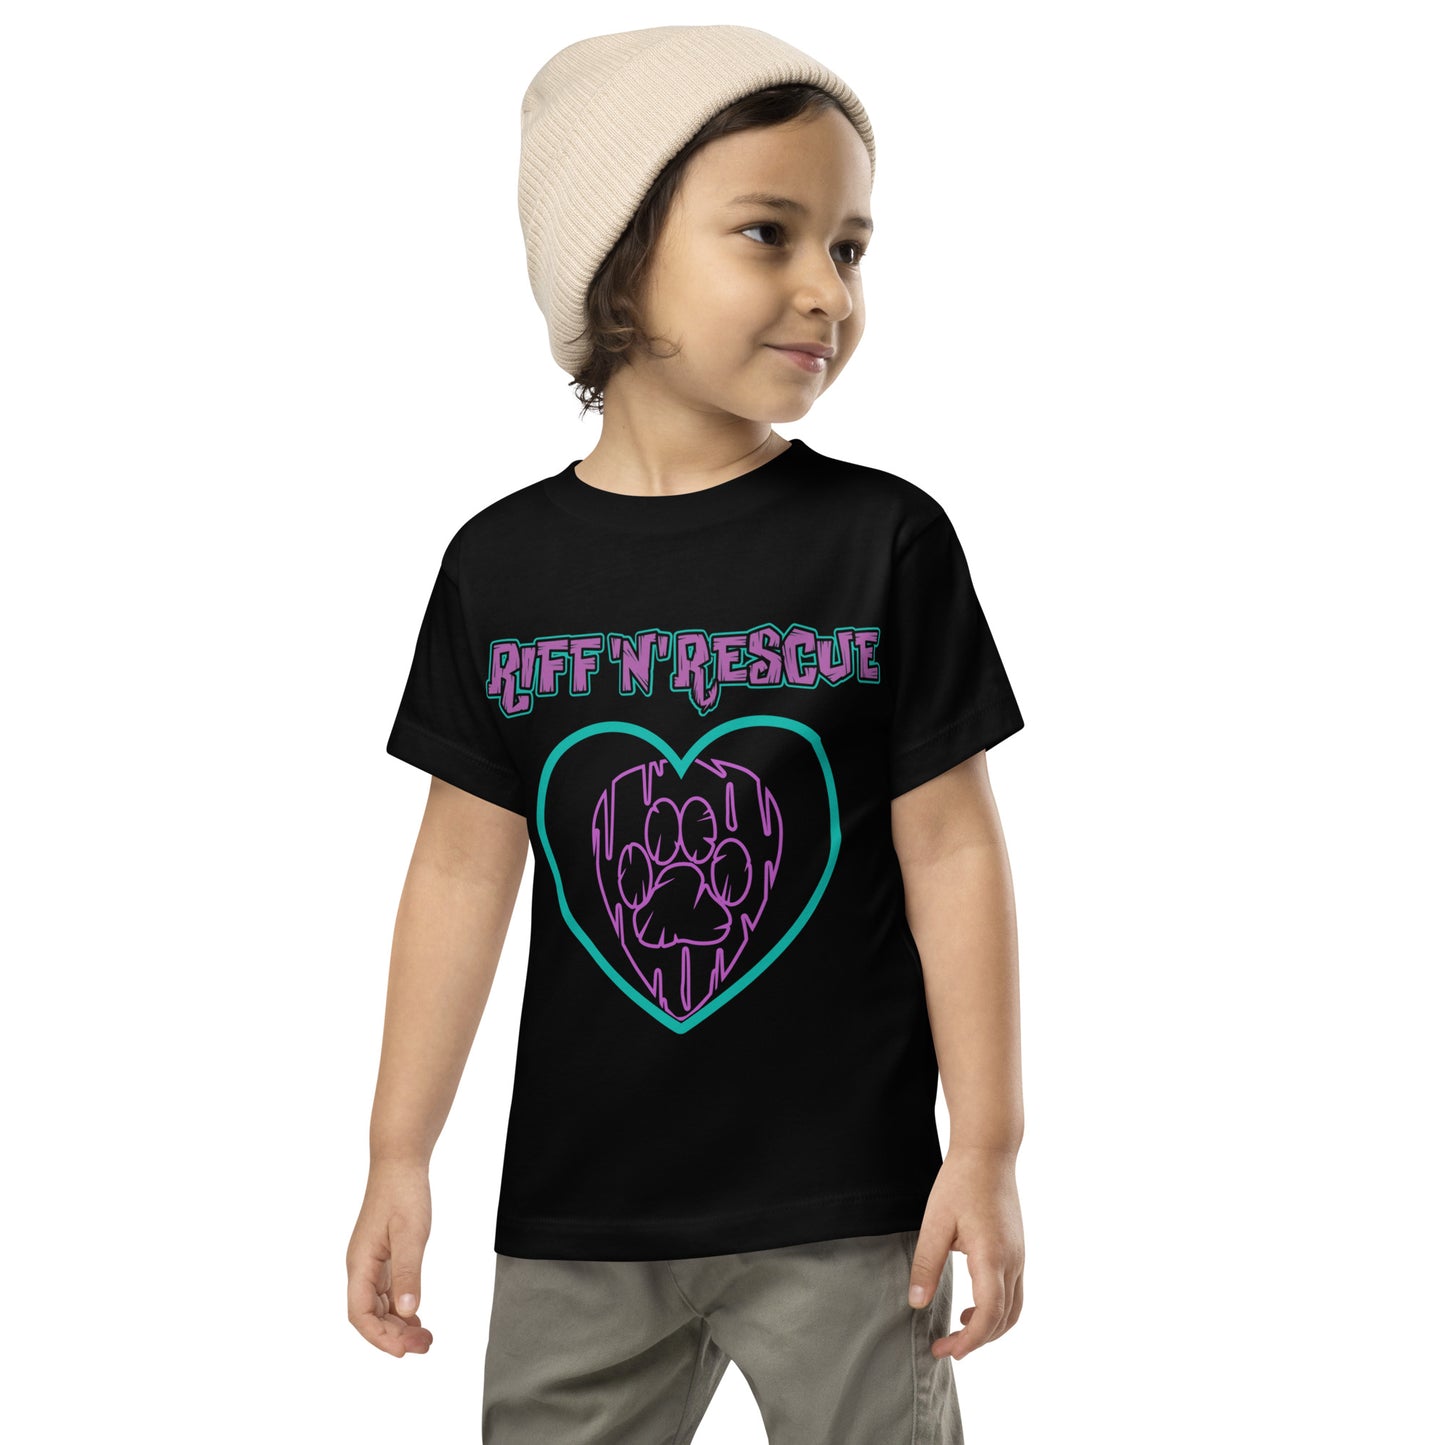 Hearts and Paws Dog Toddler Short Sleeve Tee